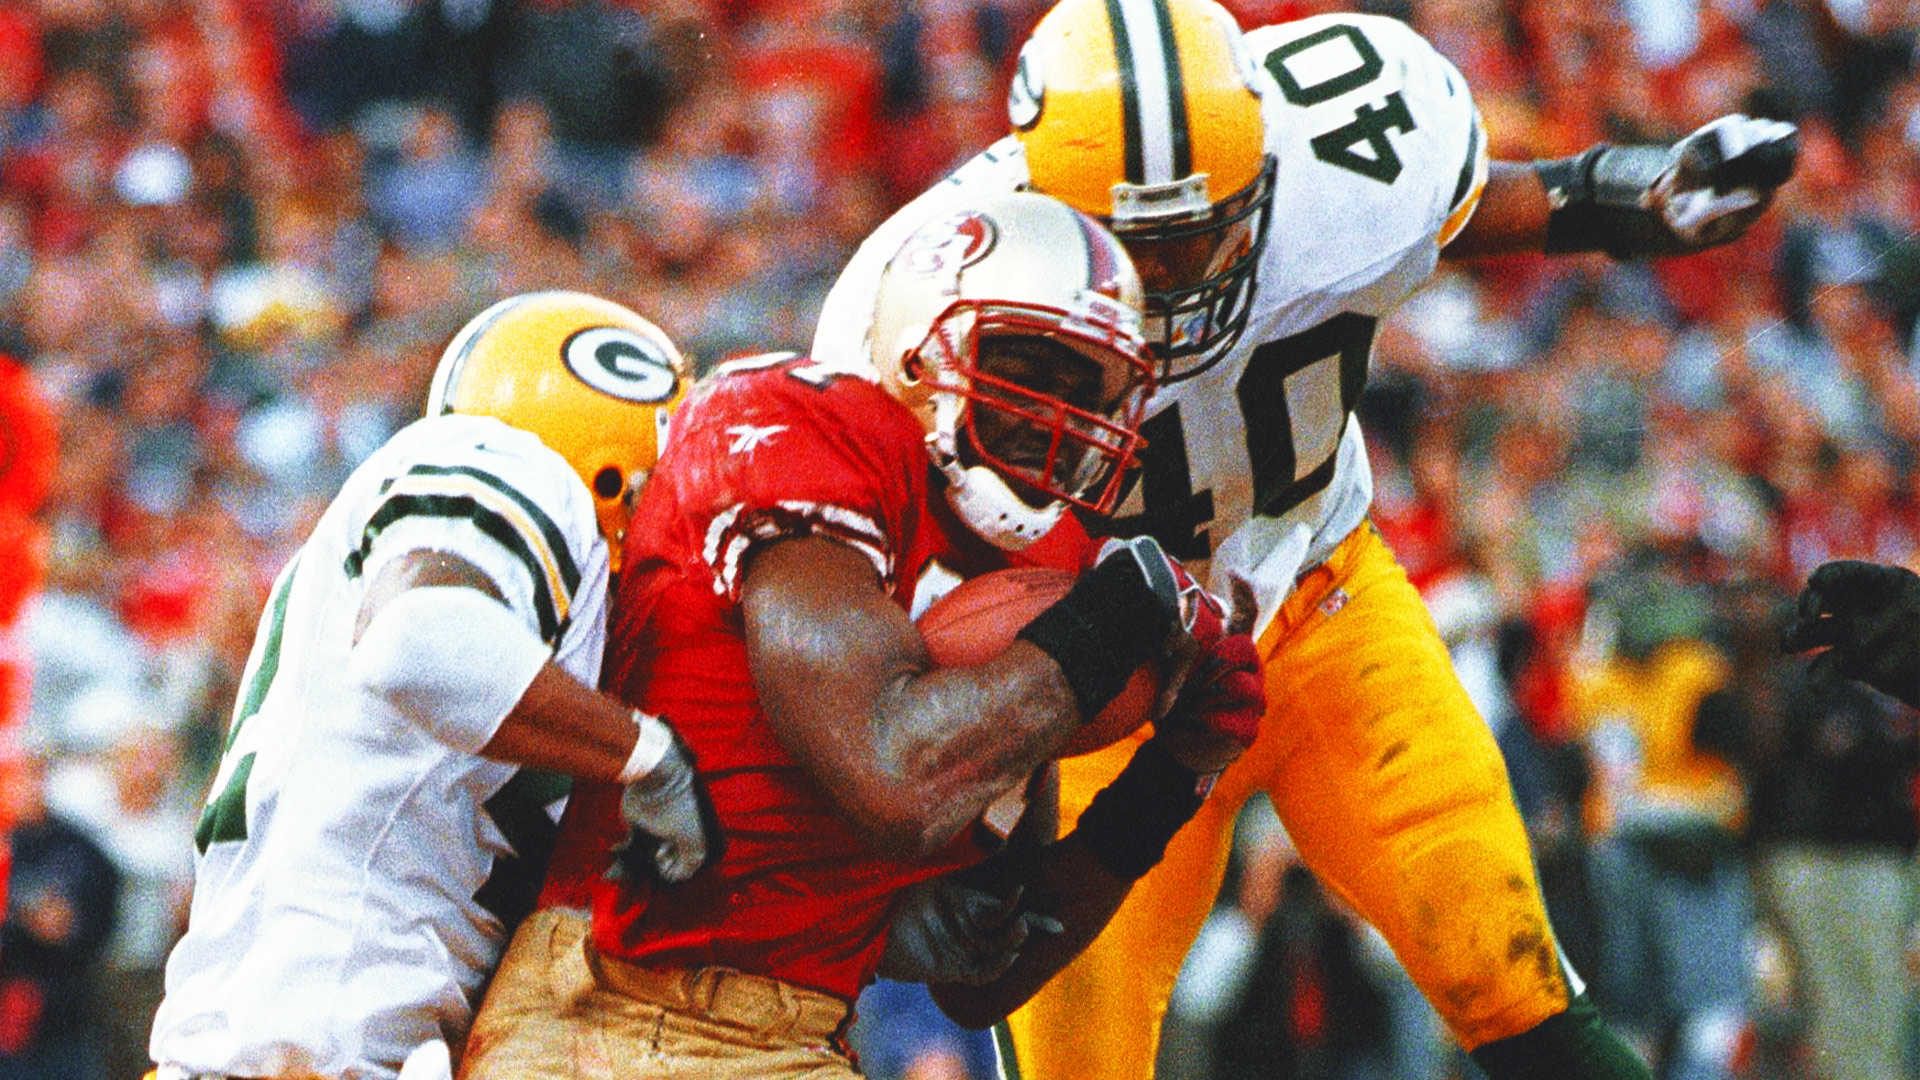 Packers-49ers playoff rivalry has produced many memorable moments